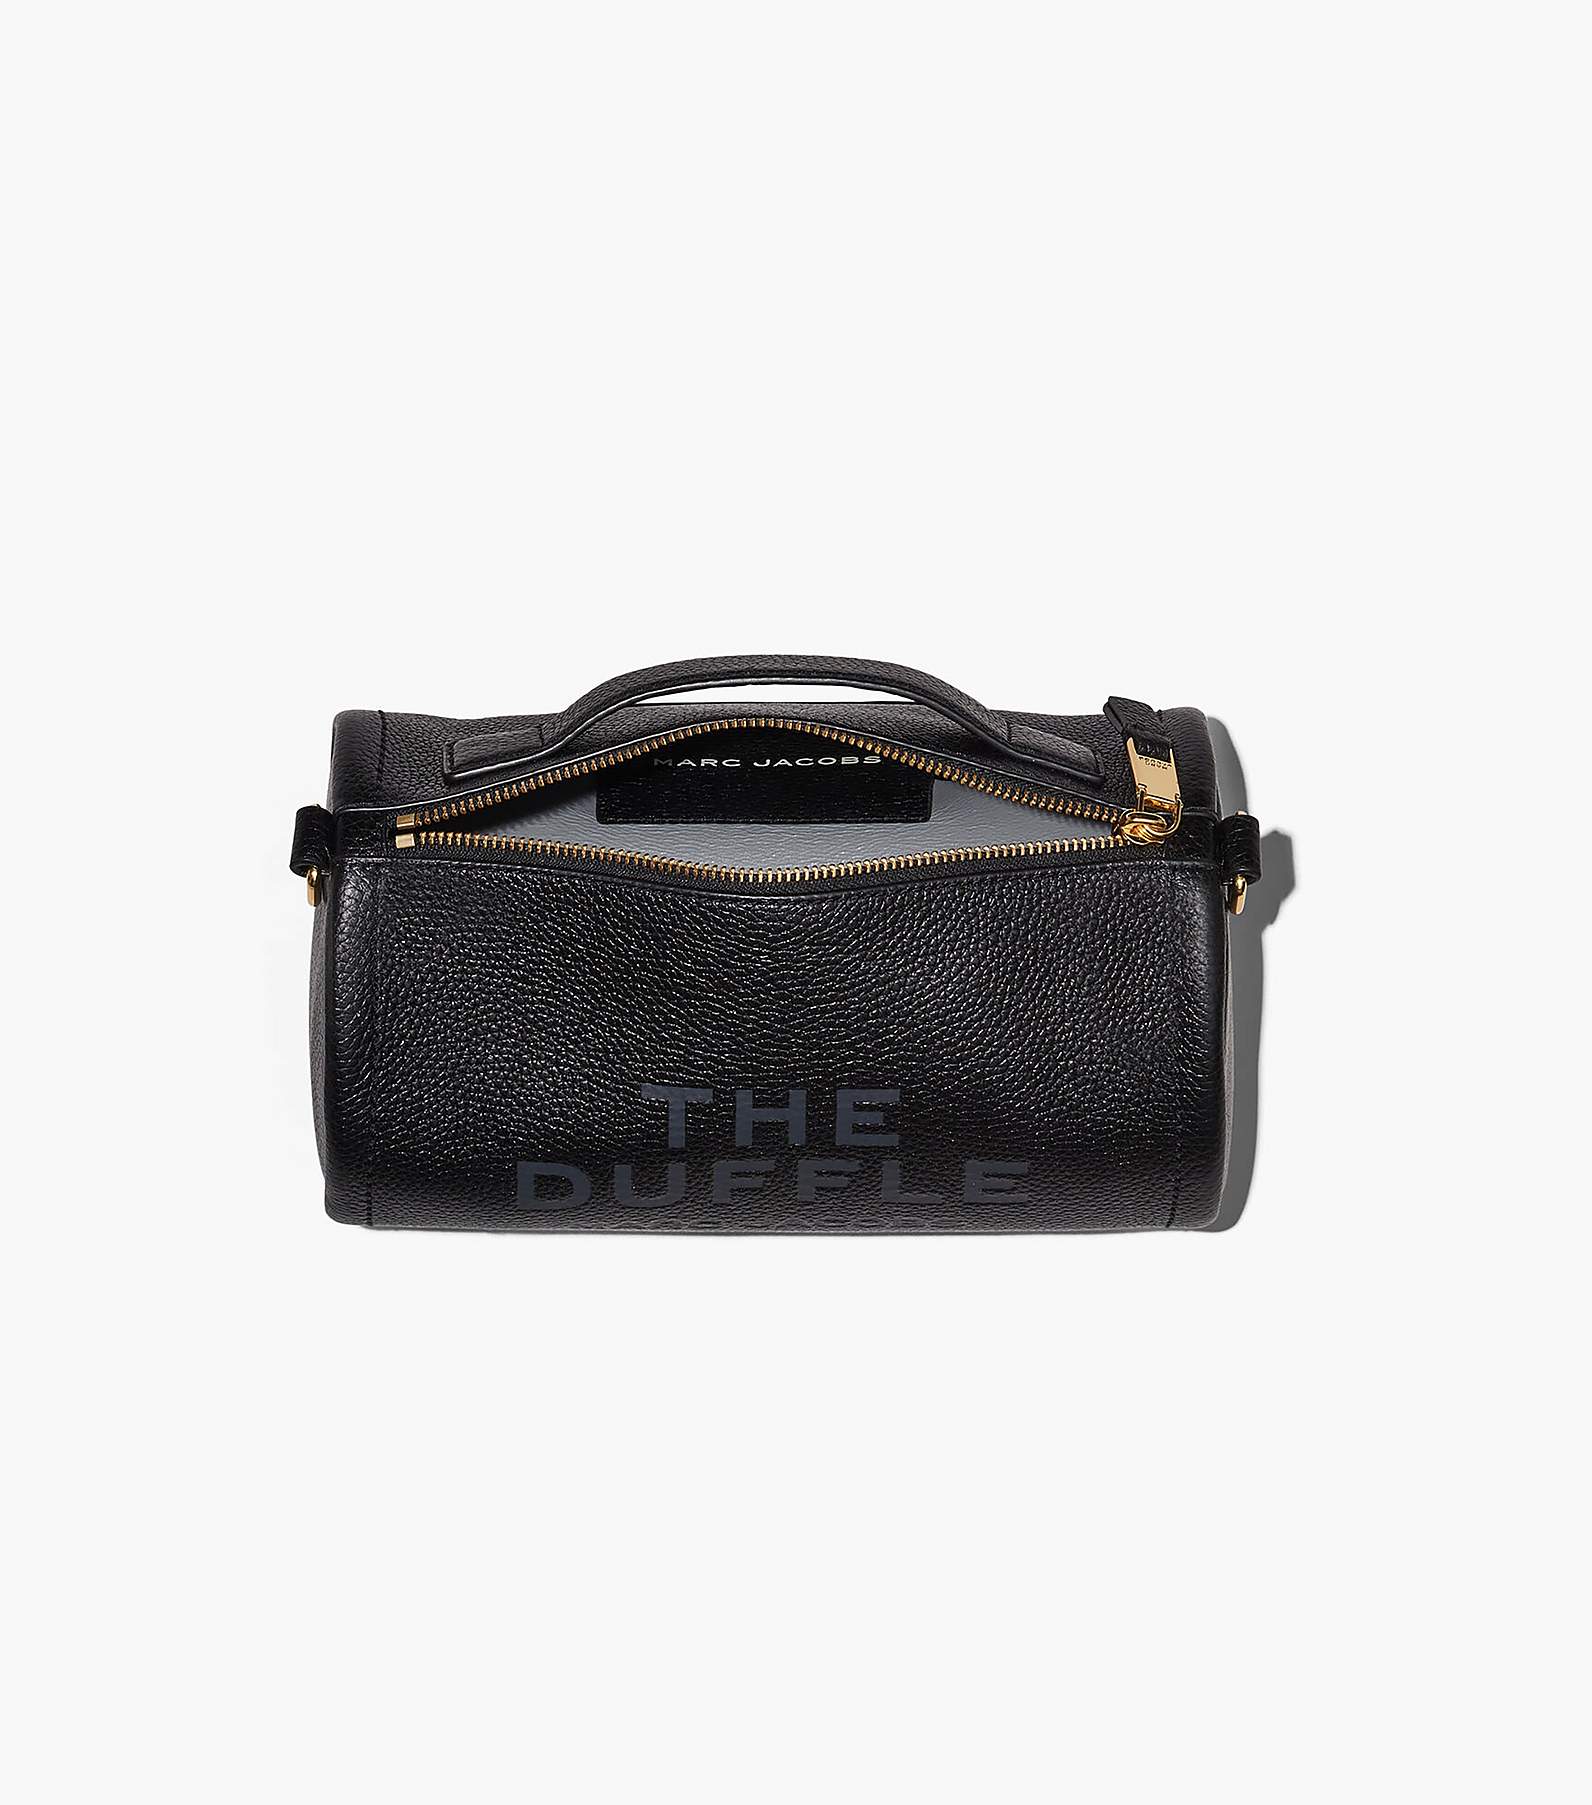 THE LEATHER DUFFLE BAG